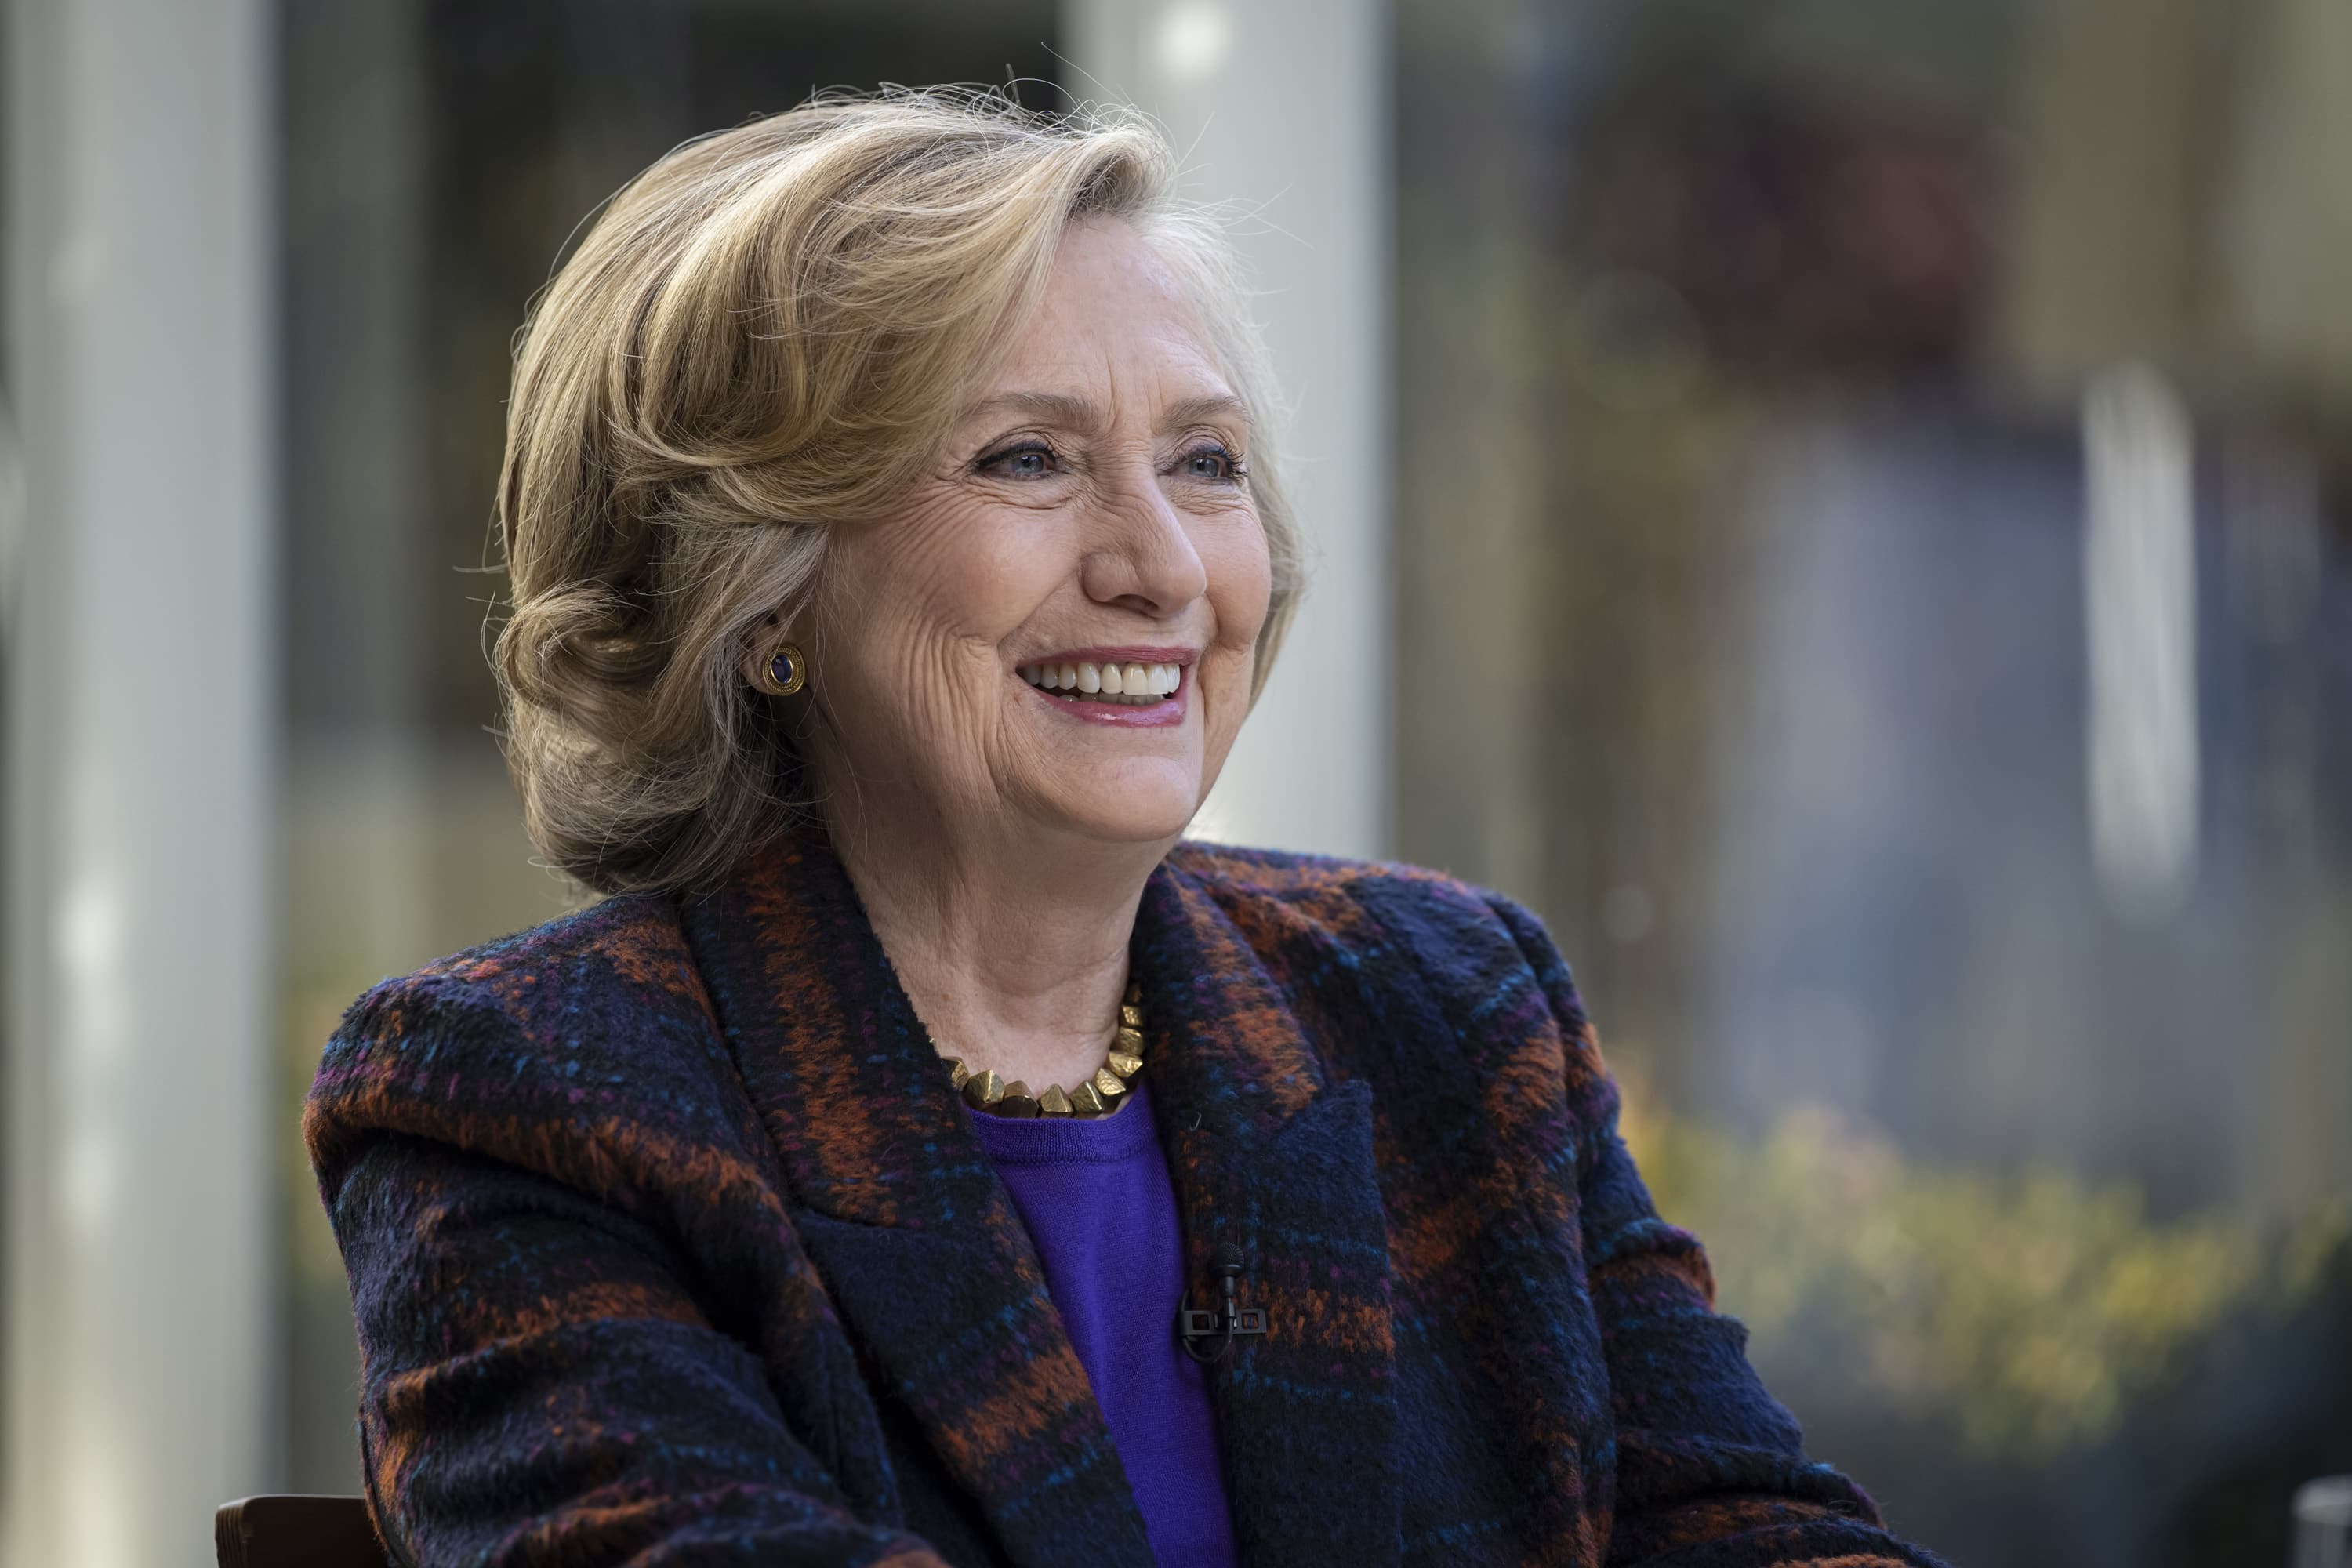 What Hillary Clinton Is Doing Now - Latest News on Hillary Clinton